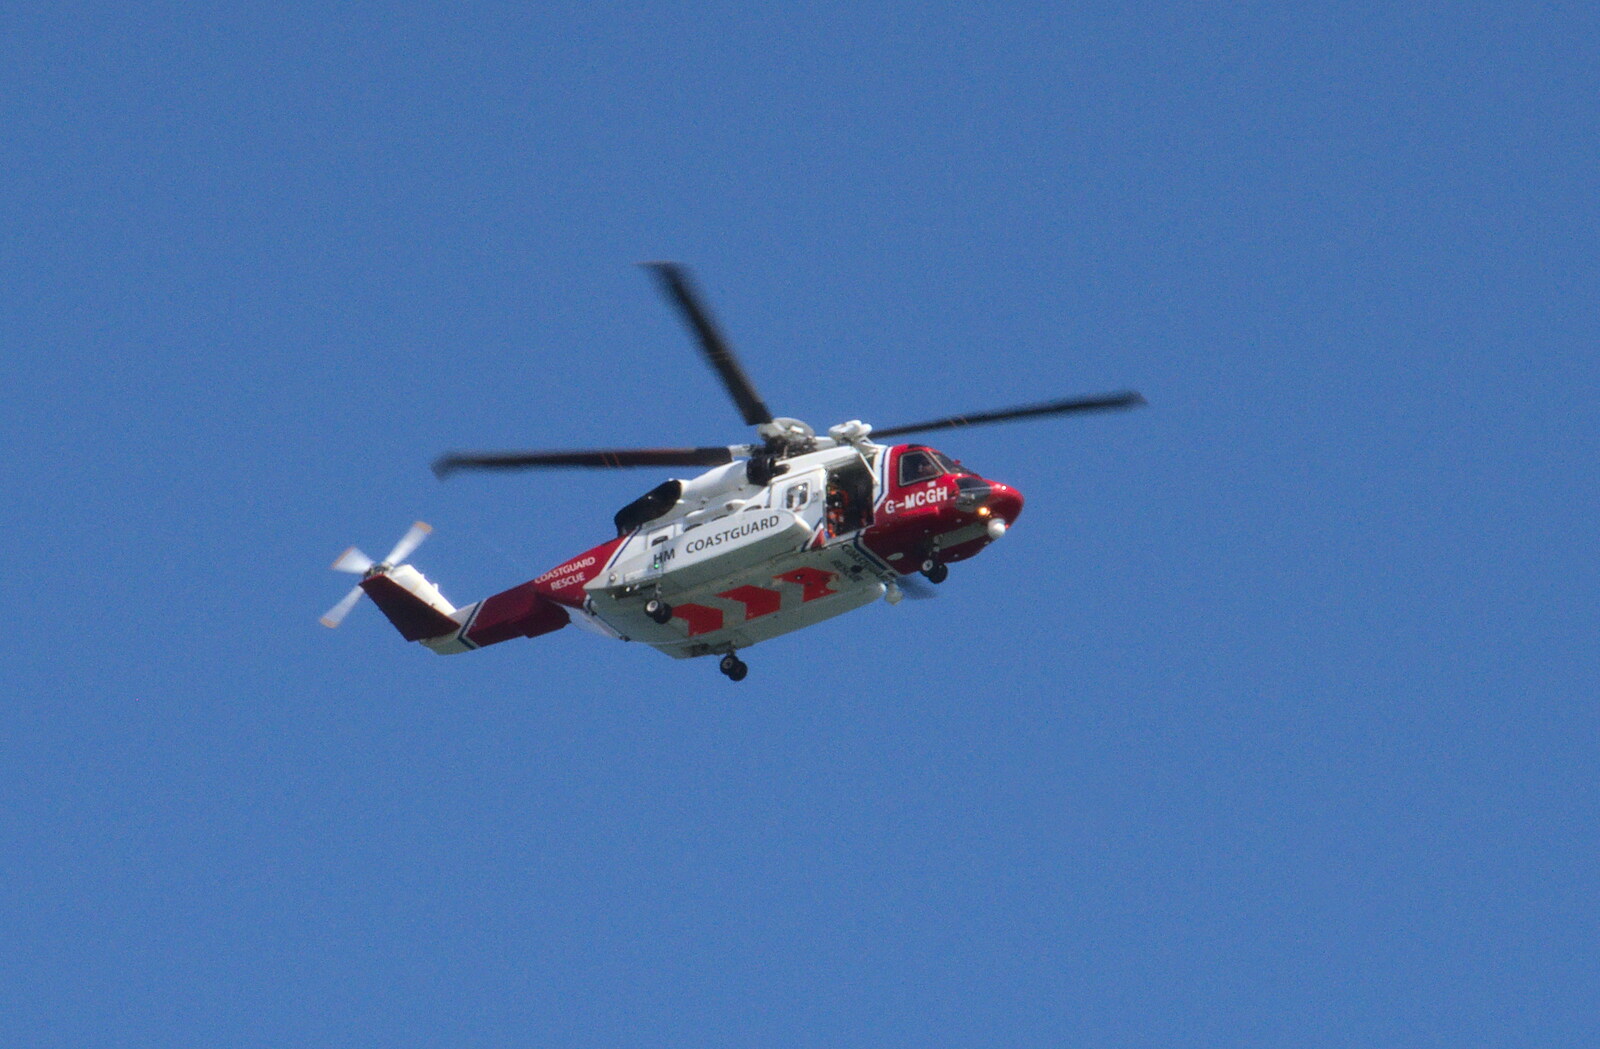 The coastguard helicopter flies over from Camping on the Coast, East Runton, North Norfolk - 25th July 2020